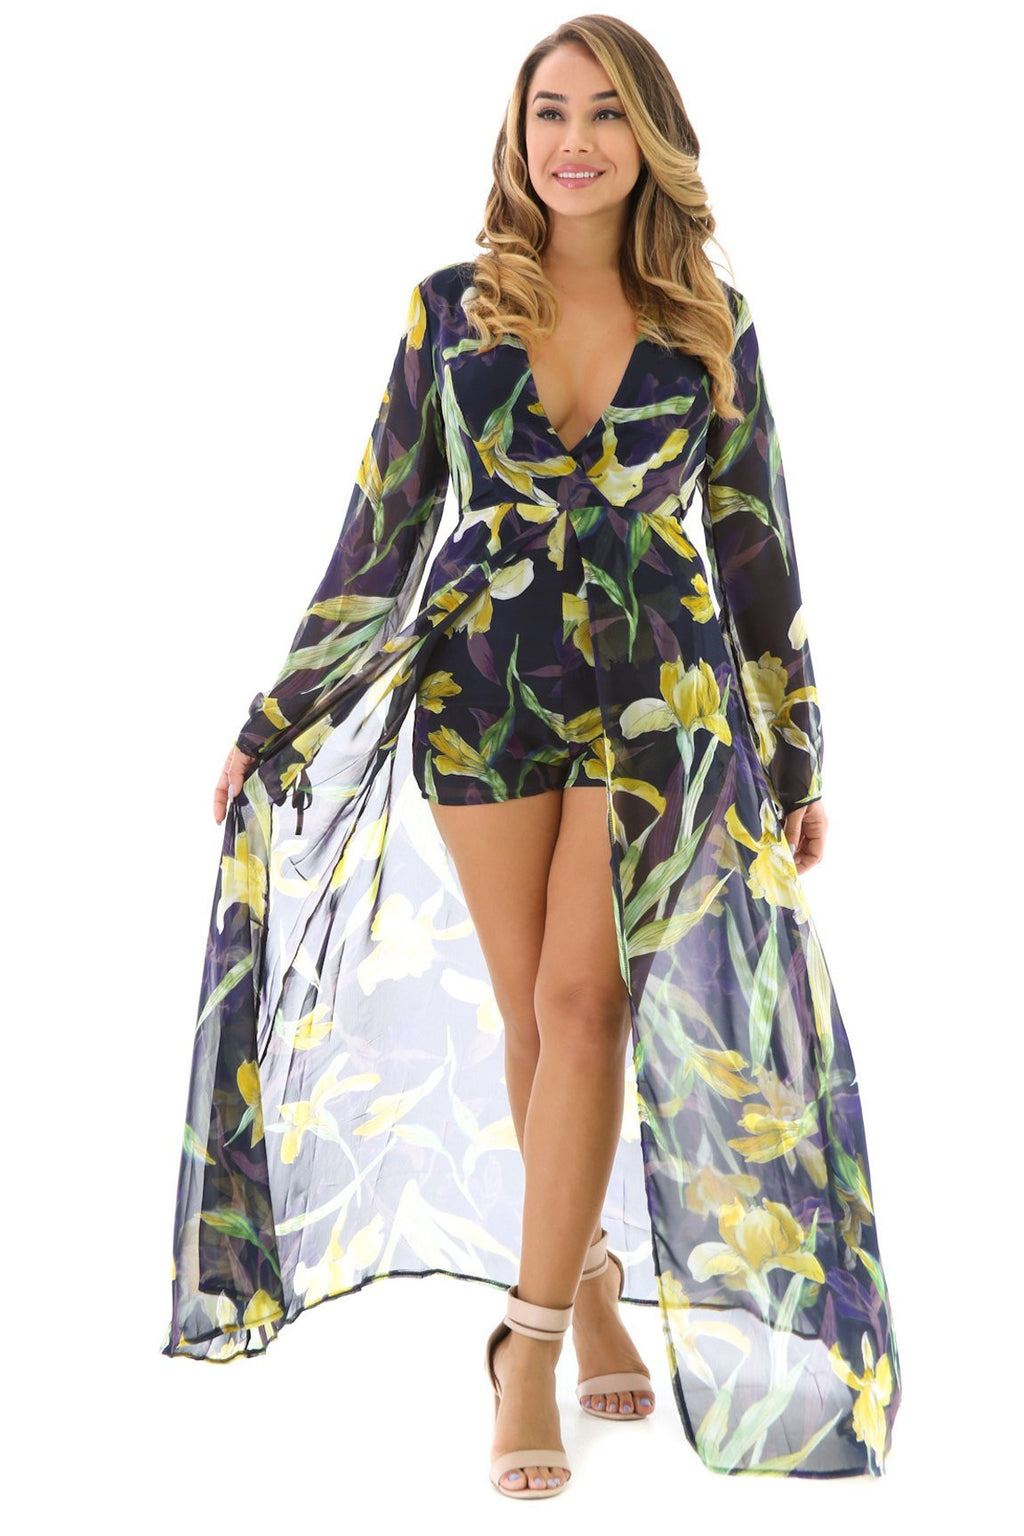 Floral Long Sleeve Maxi Romper - Classy & Sassy Styles Boutique